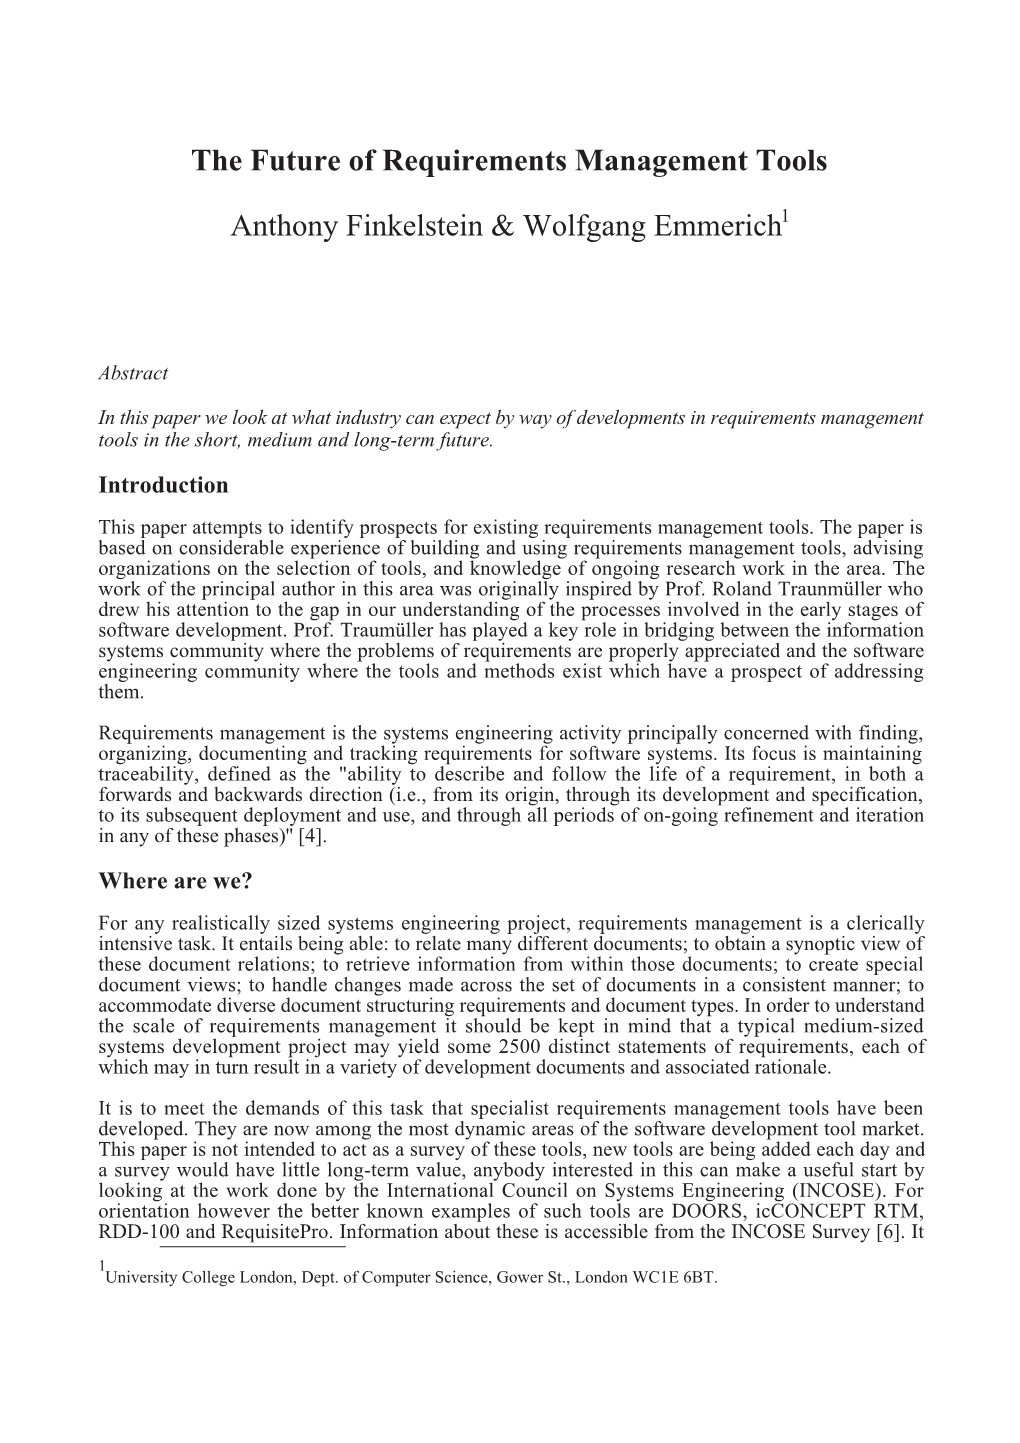 The Future of Requirements Management Tools Anthony Finkelstein & Wolfgang Emmerich